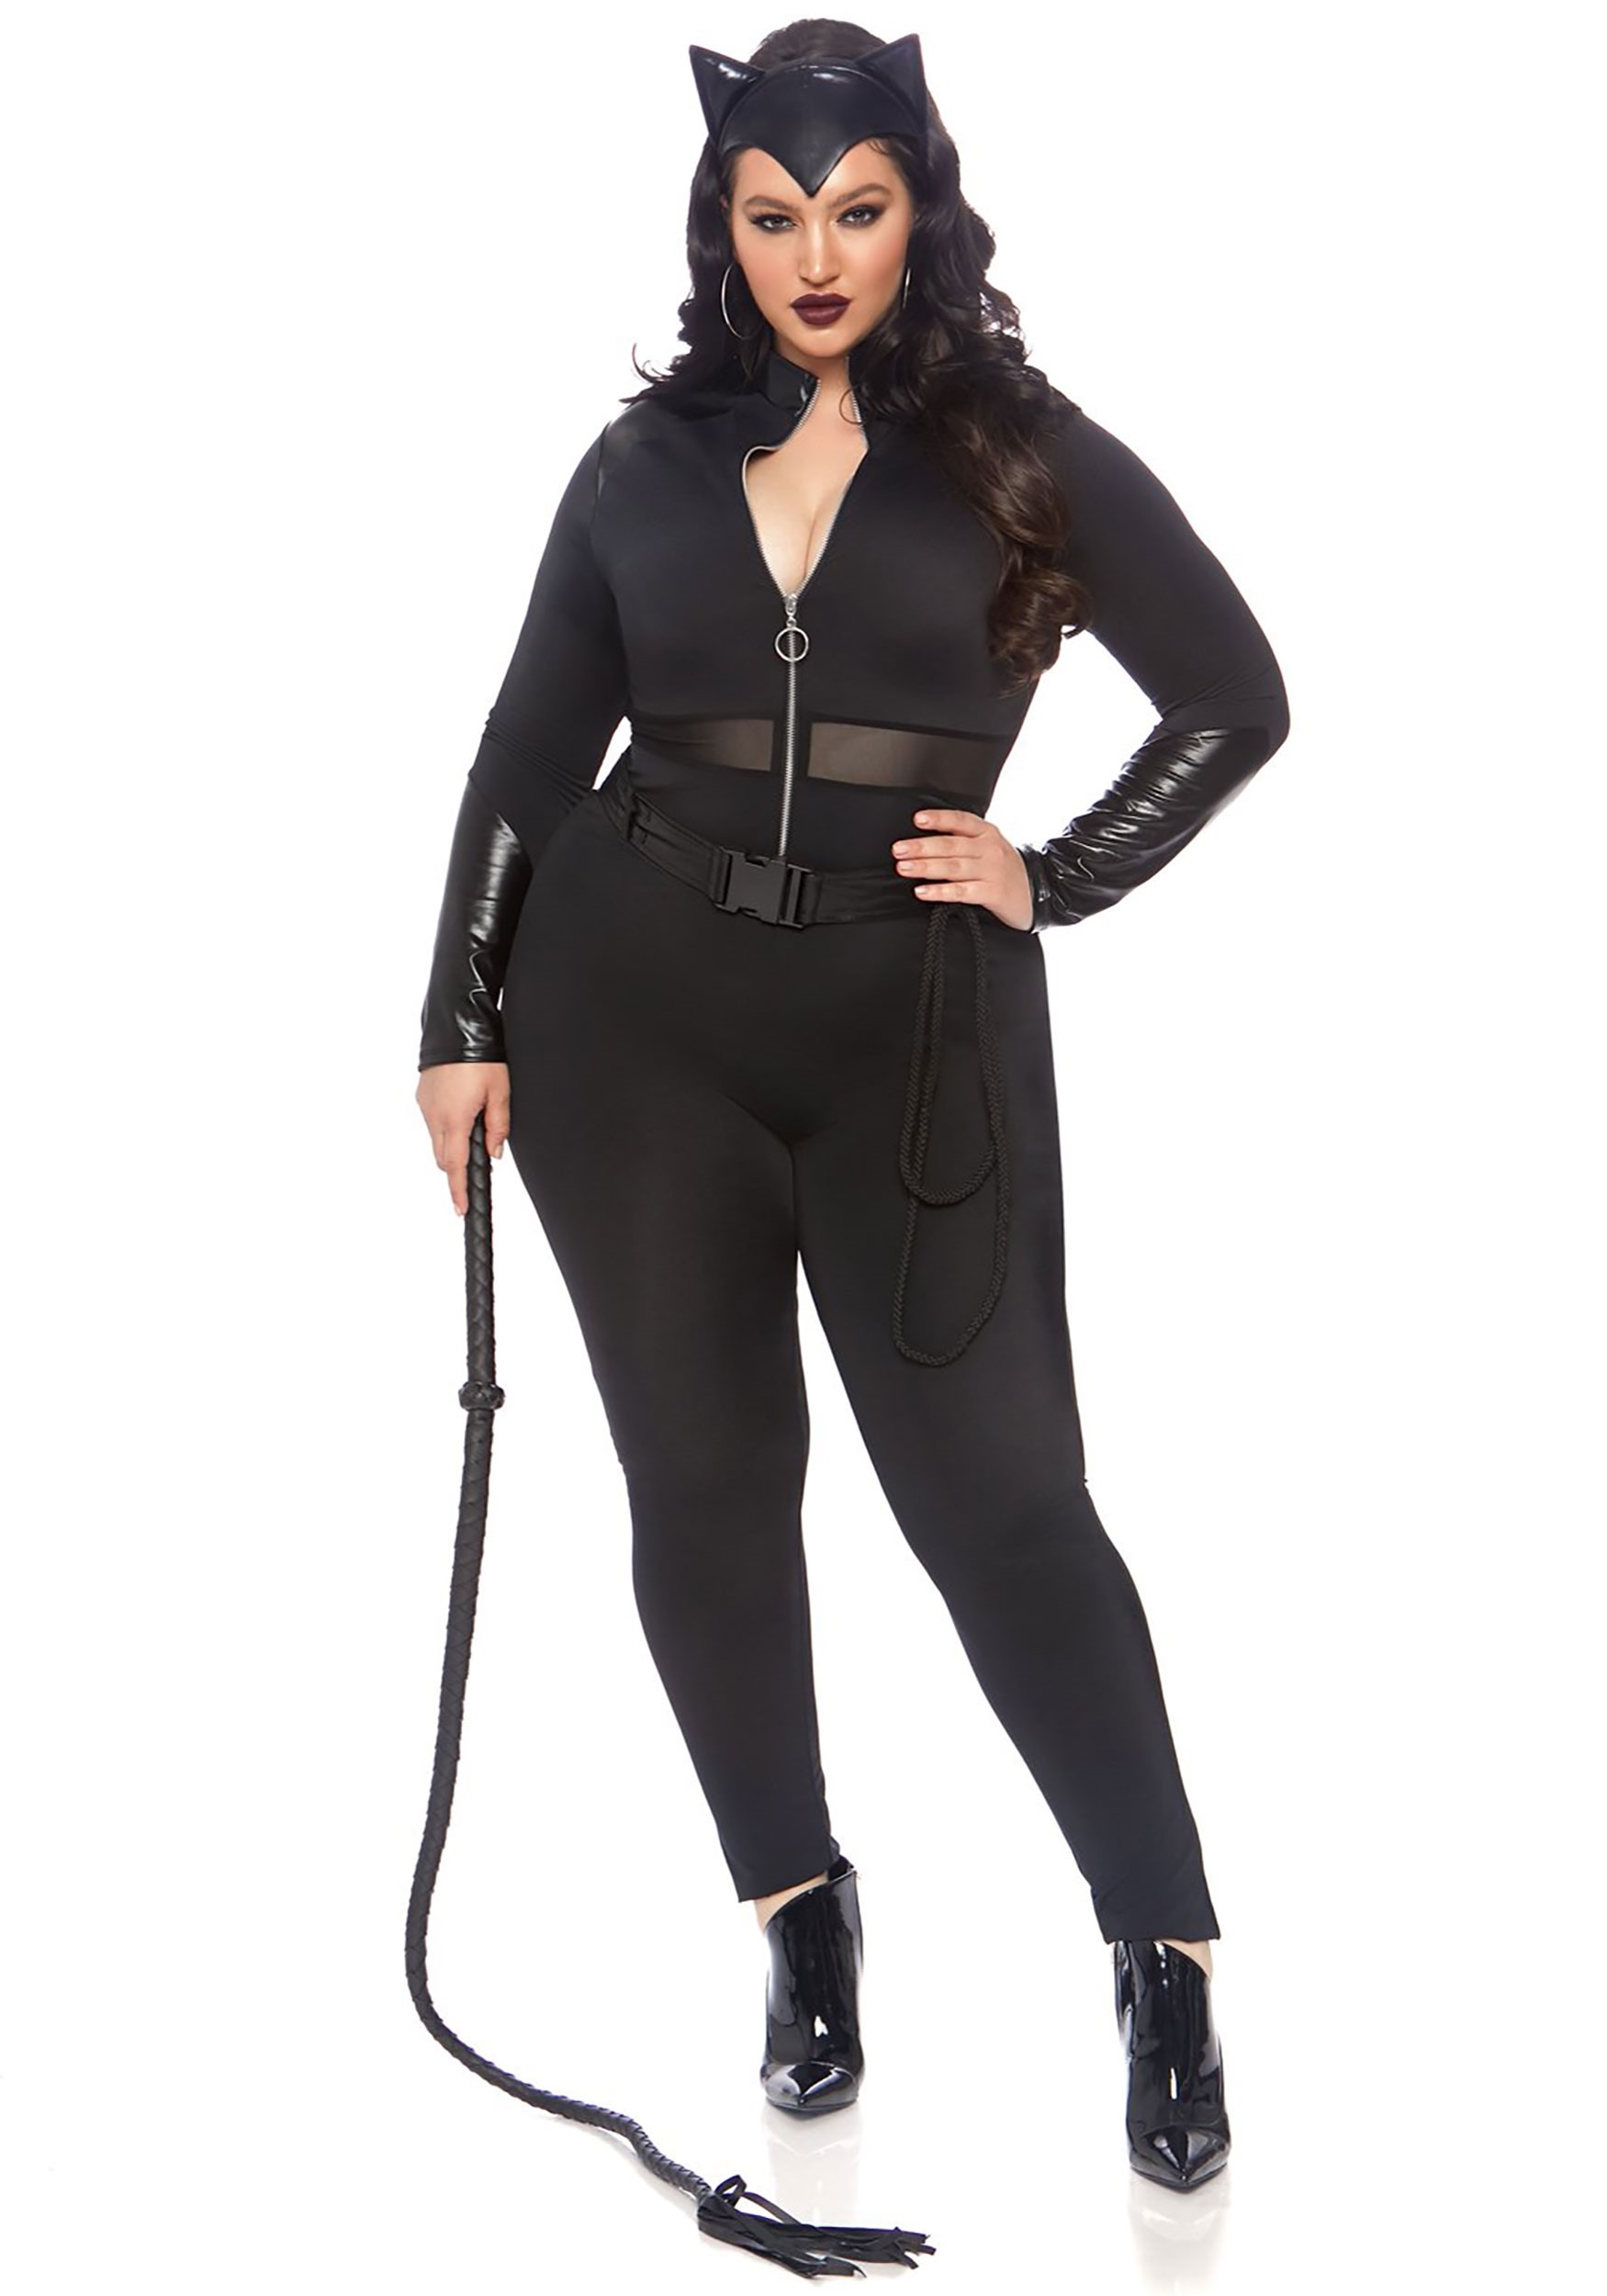 Sultry Supervillain - Women's Plus Size Costume